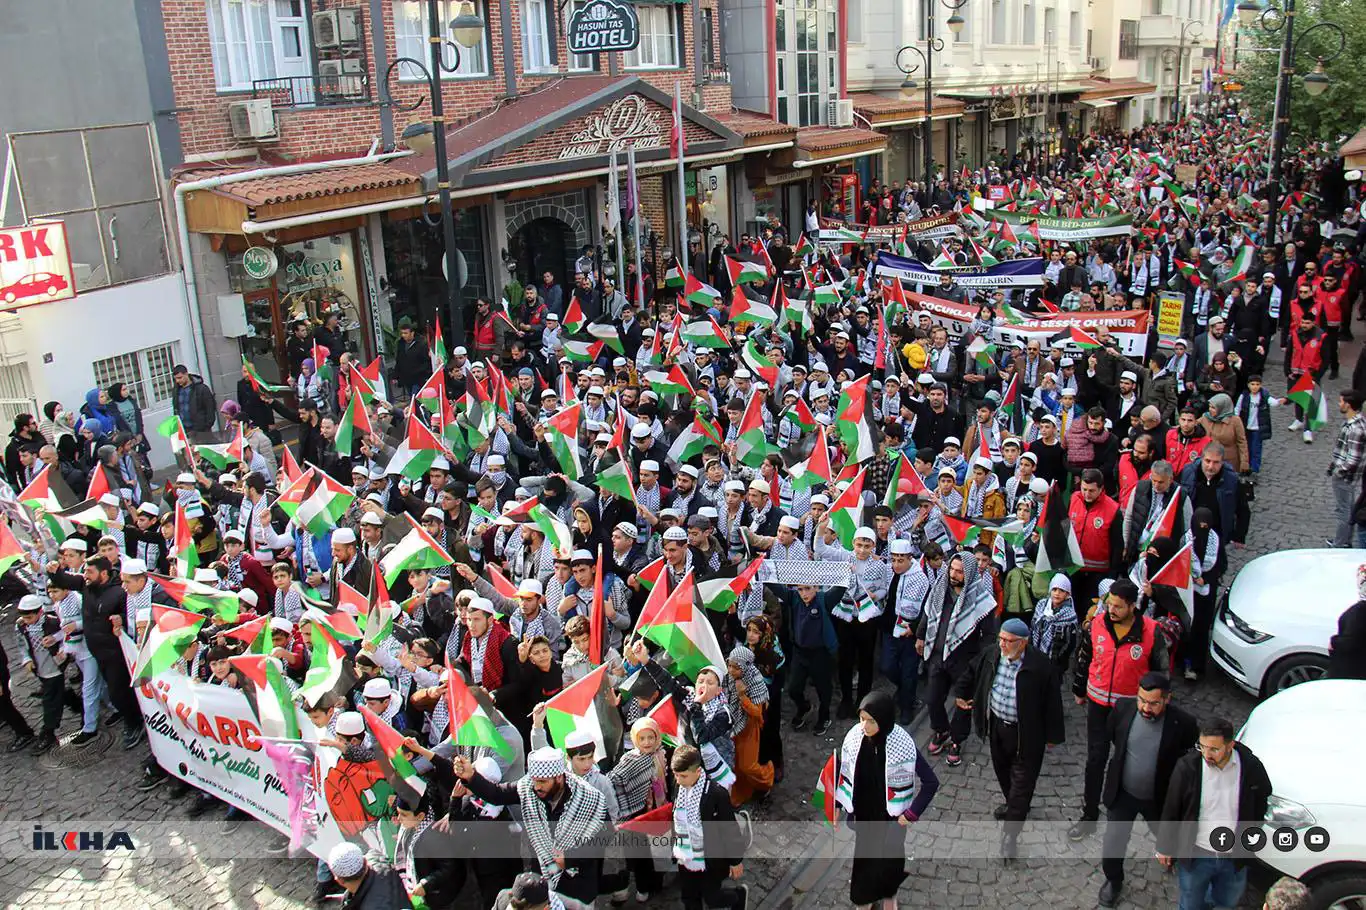 Children in Diyarbakır march for Gaza, express solidarity and hope